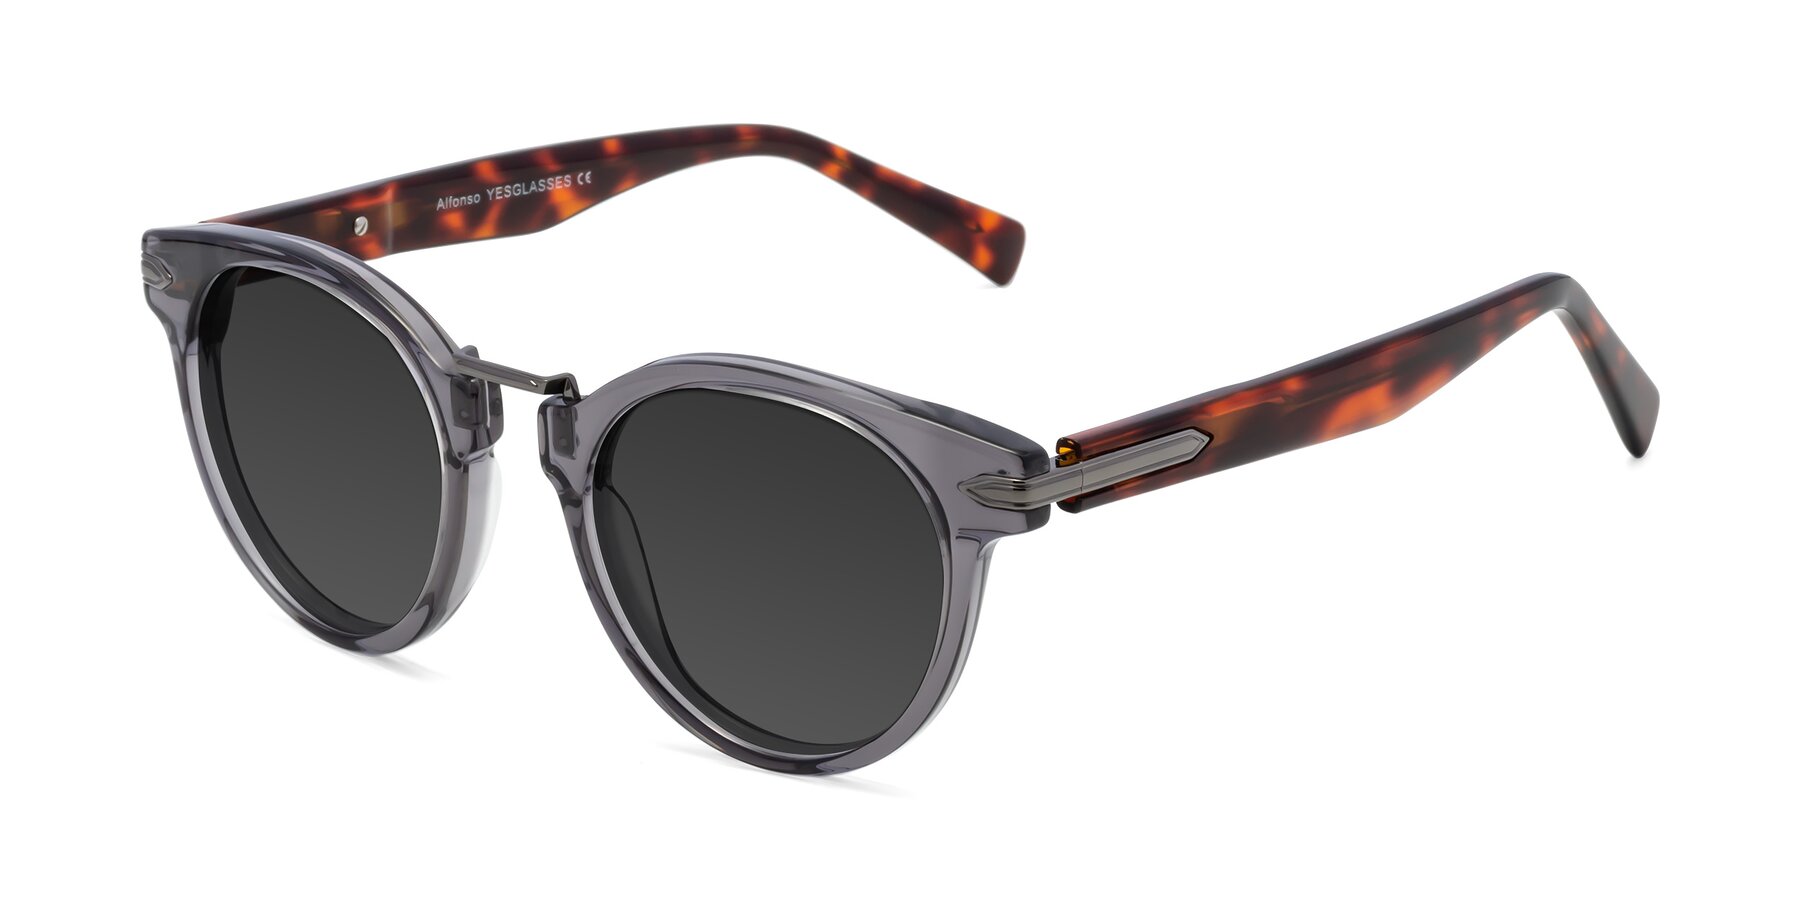 Angle of Alfonso in Gray /Tortoise with Gray Tinted Lenses